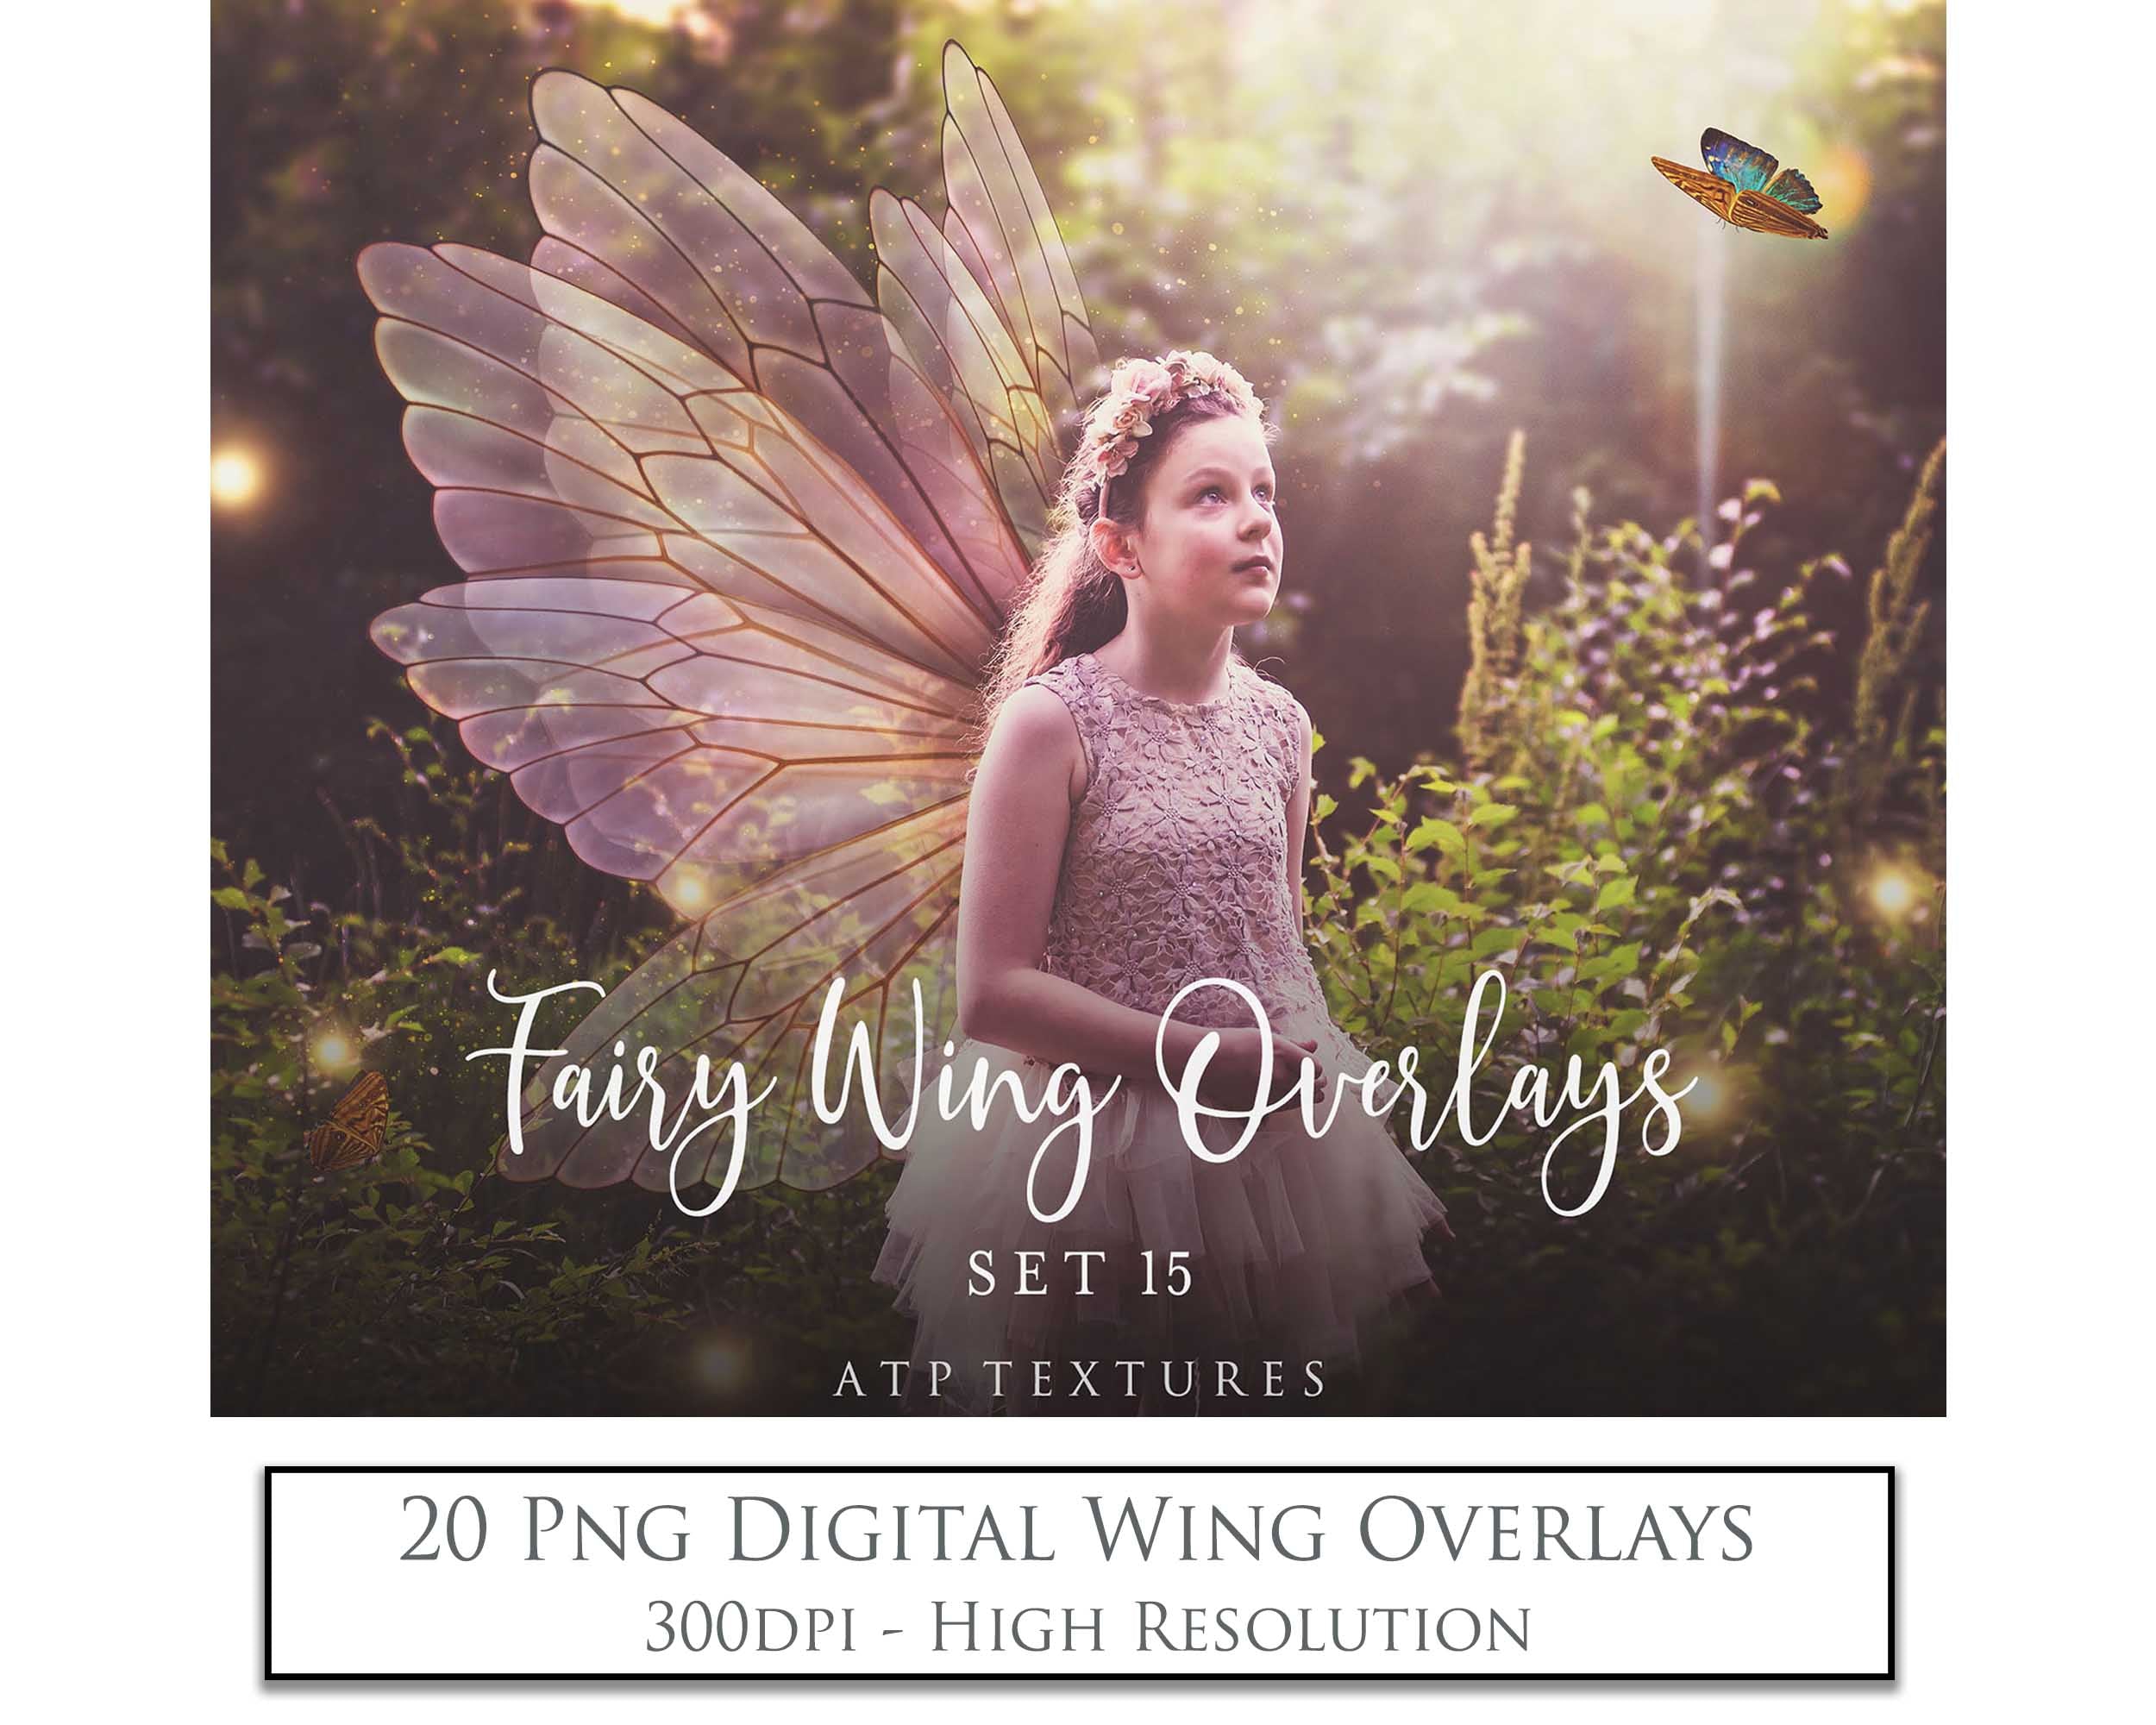 Digital Fairy Wing Overlays clipart. Png transparent see through files for photoshop. Butterfly Angel, Color, Print Photography editing. High resolution, 300dpi. Printable, Photography Graphic design assets, add on stock resources. Scrapbooking design. Fairy Photographer edit. Colorful Big Bundle. ATP Textures.